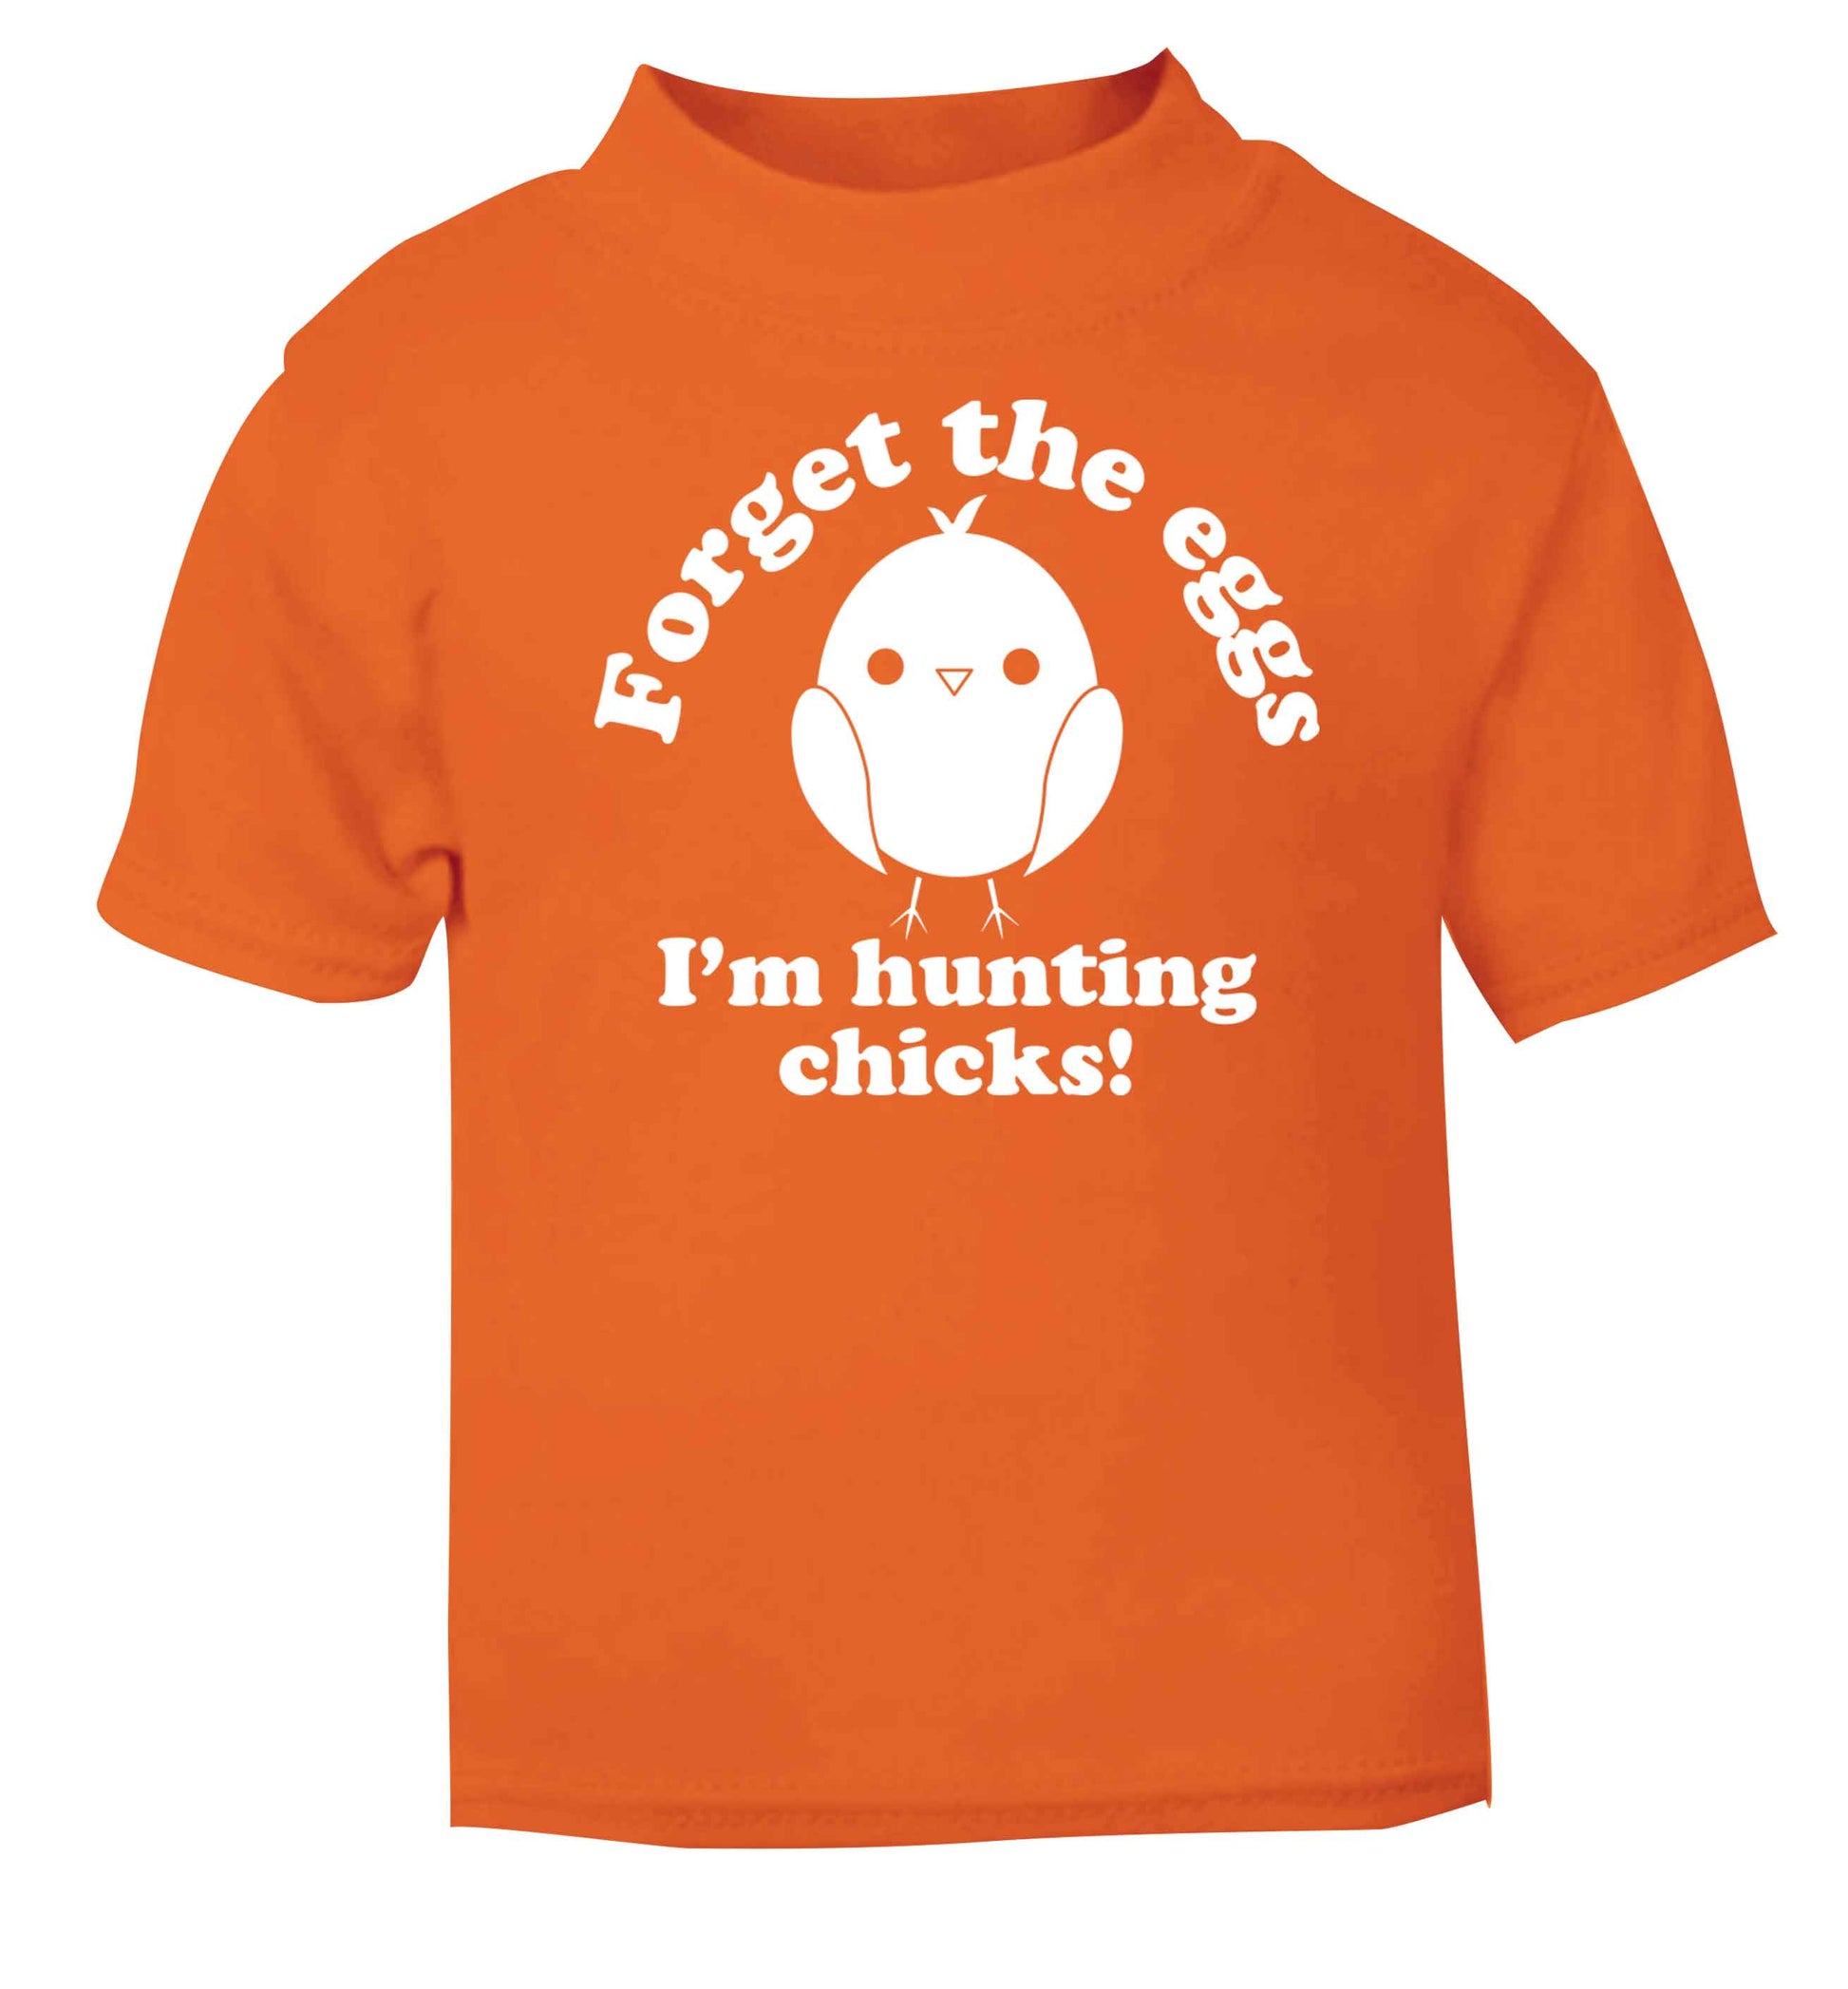 Forget the eggs I'm hunting chicks! orange baby toddler Tshirt 2 Years